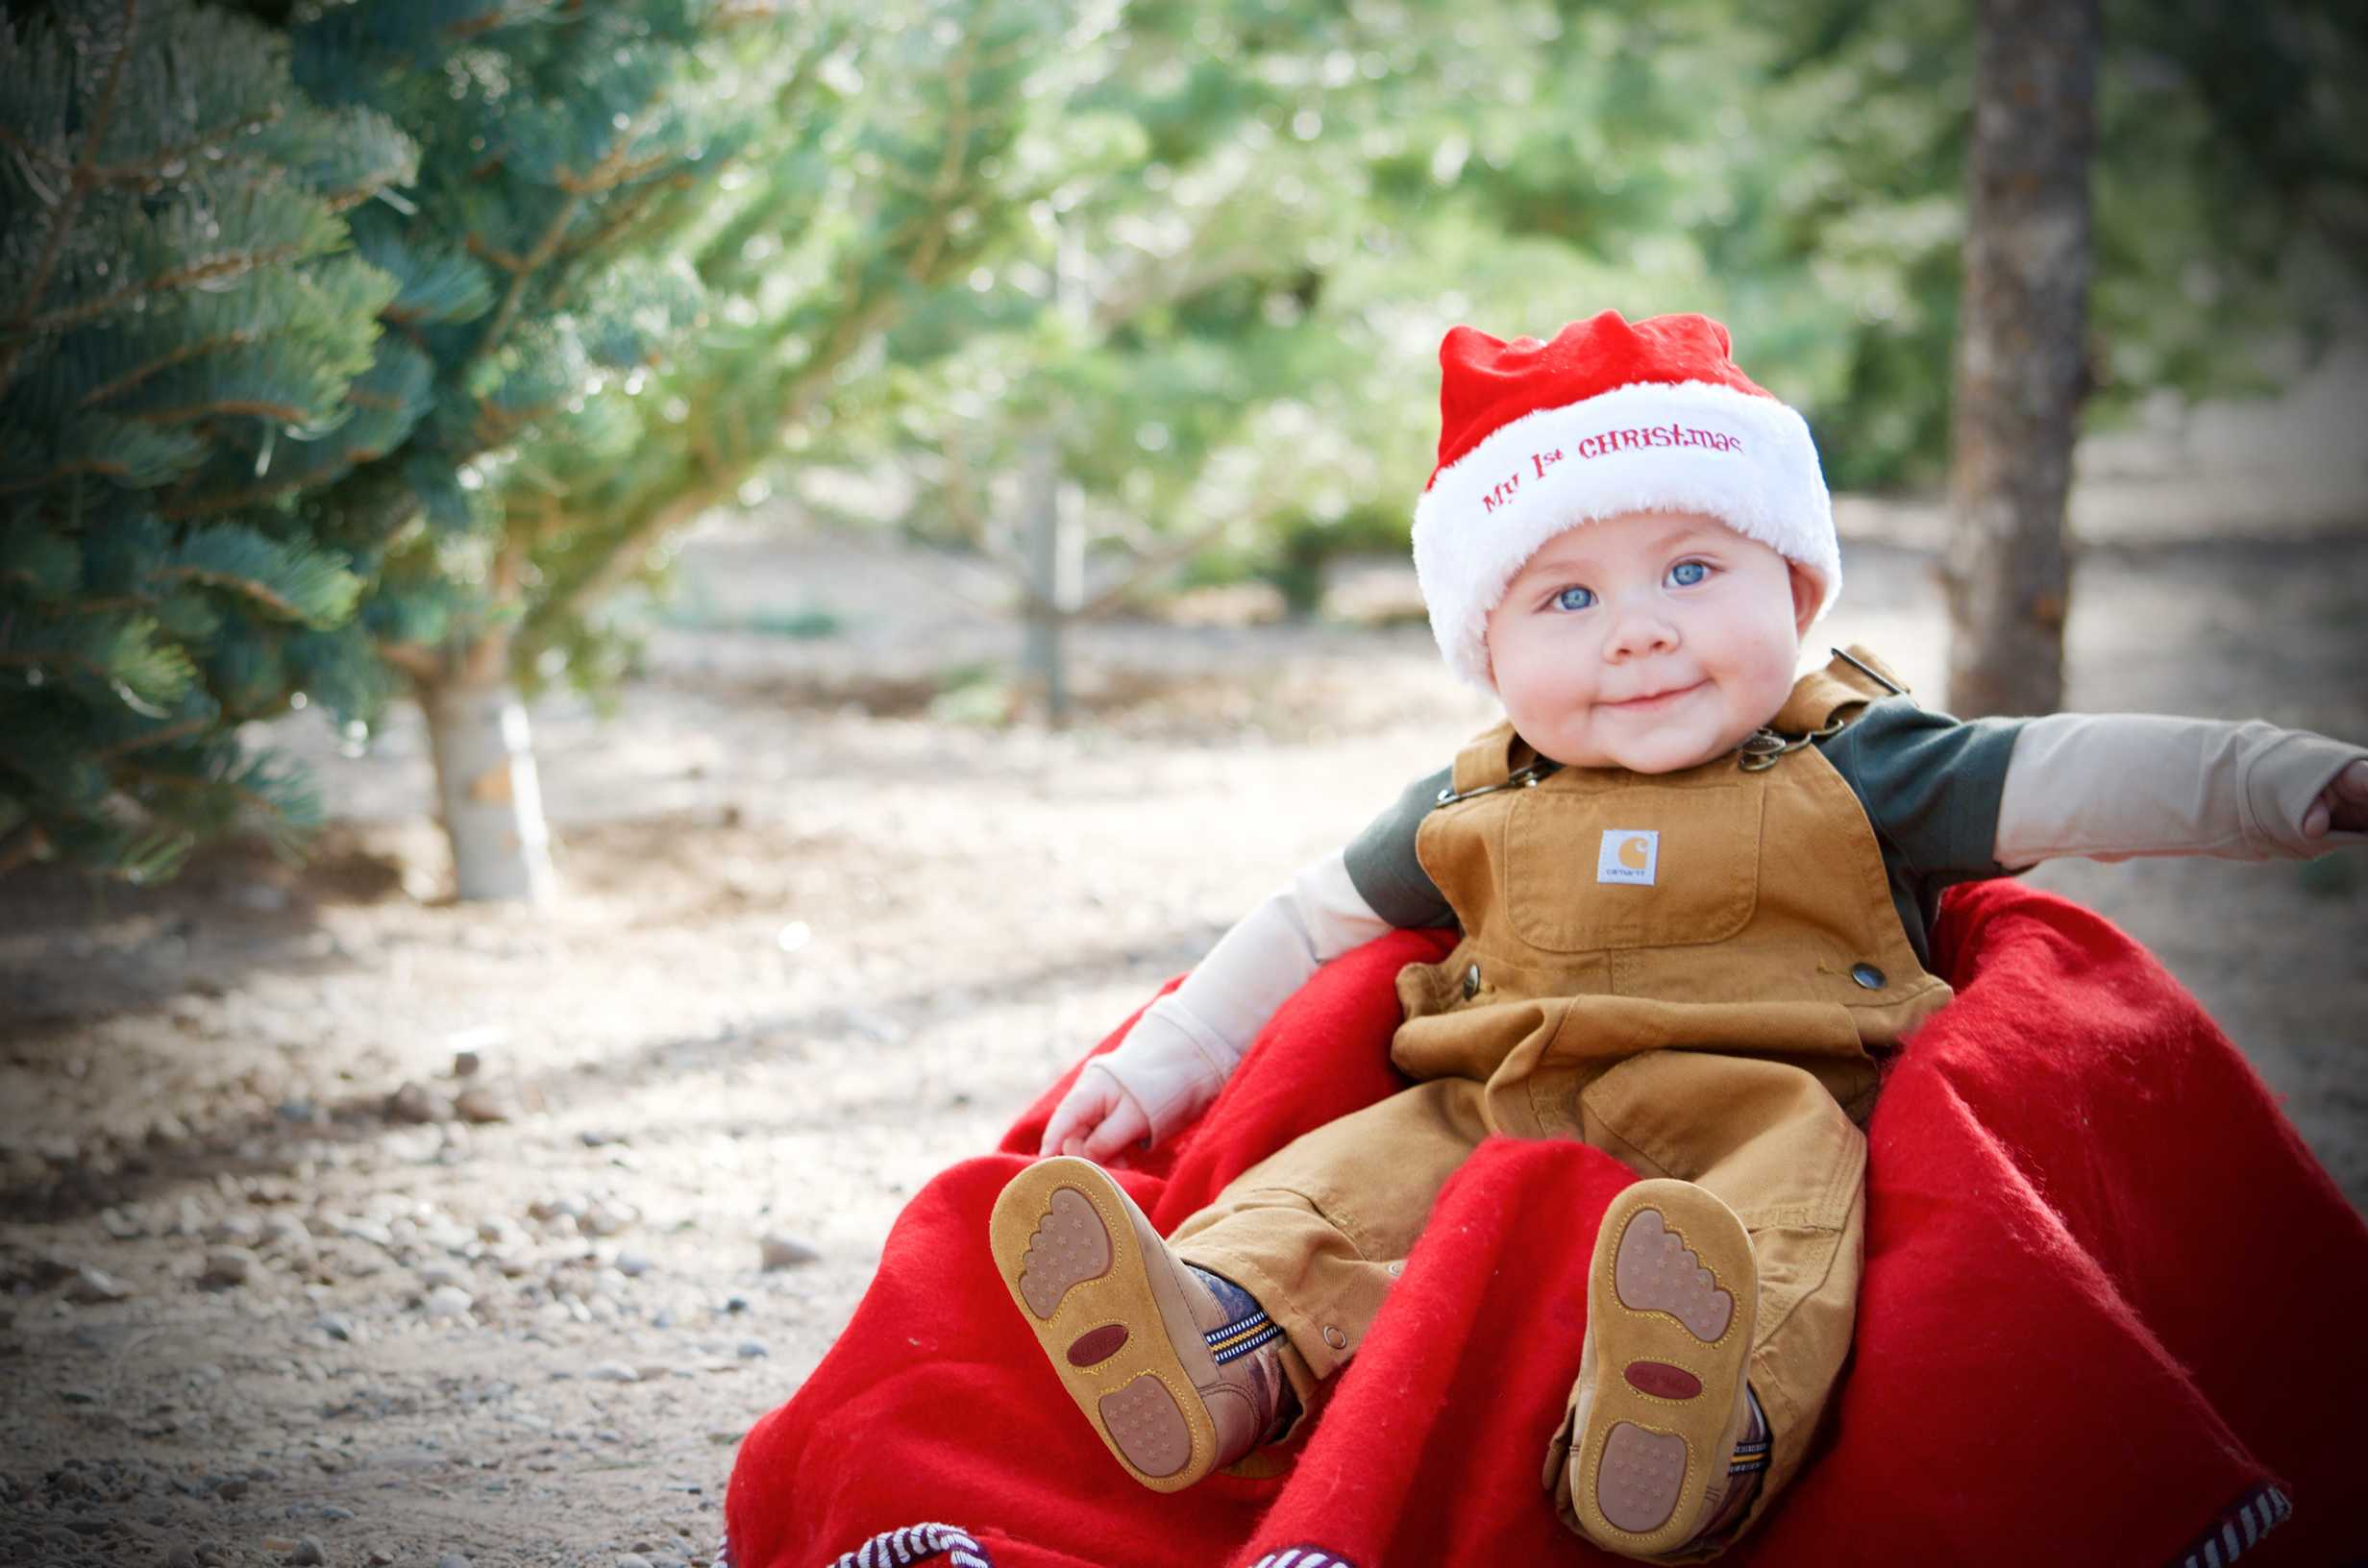 Families share their favorite holiday traditions